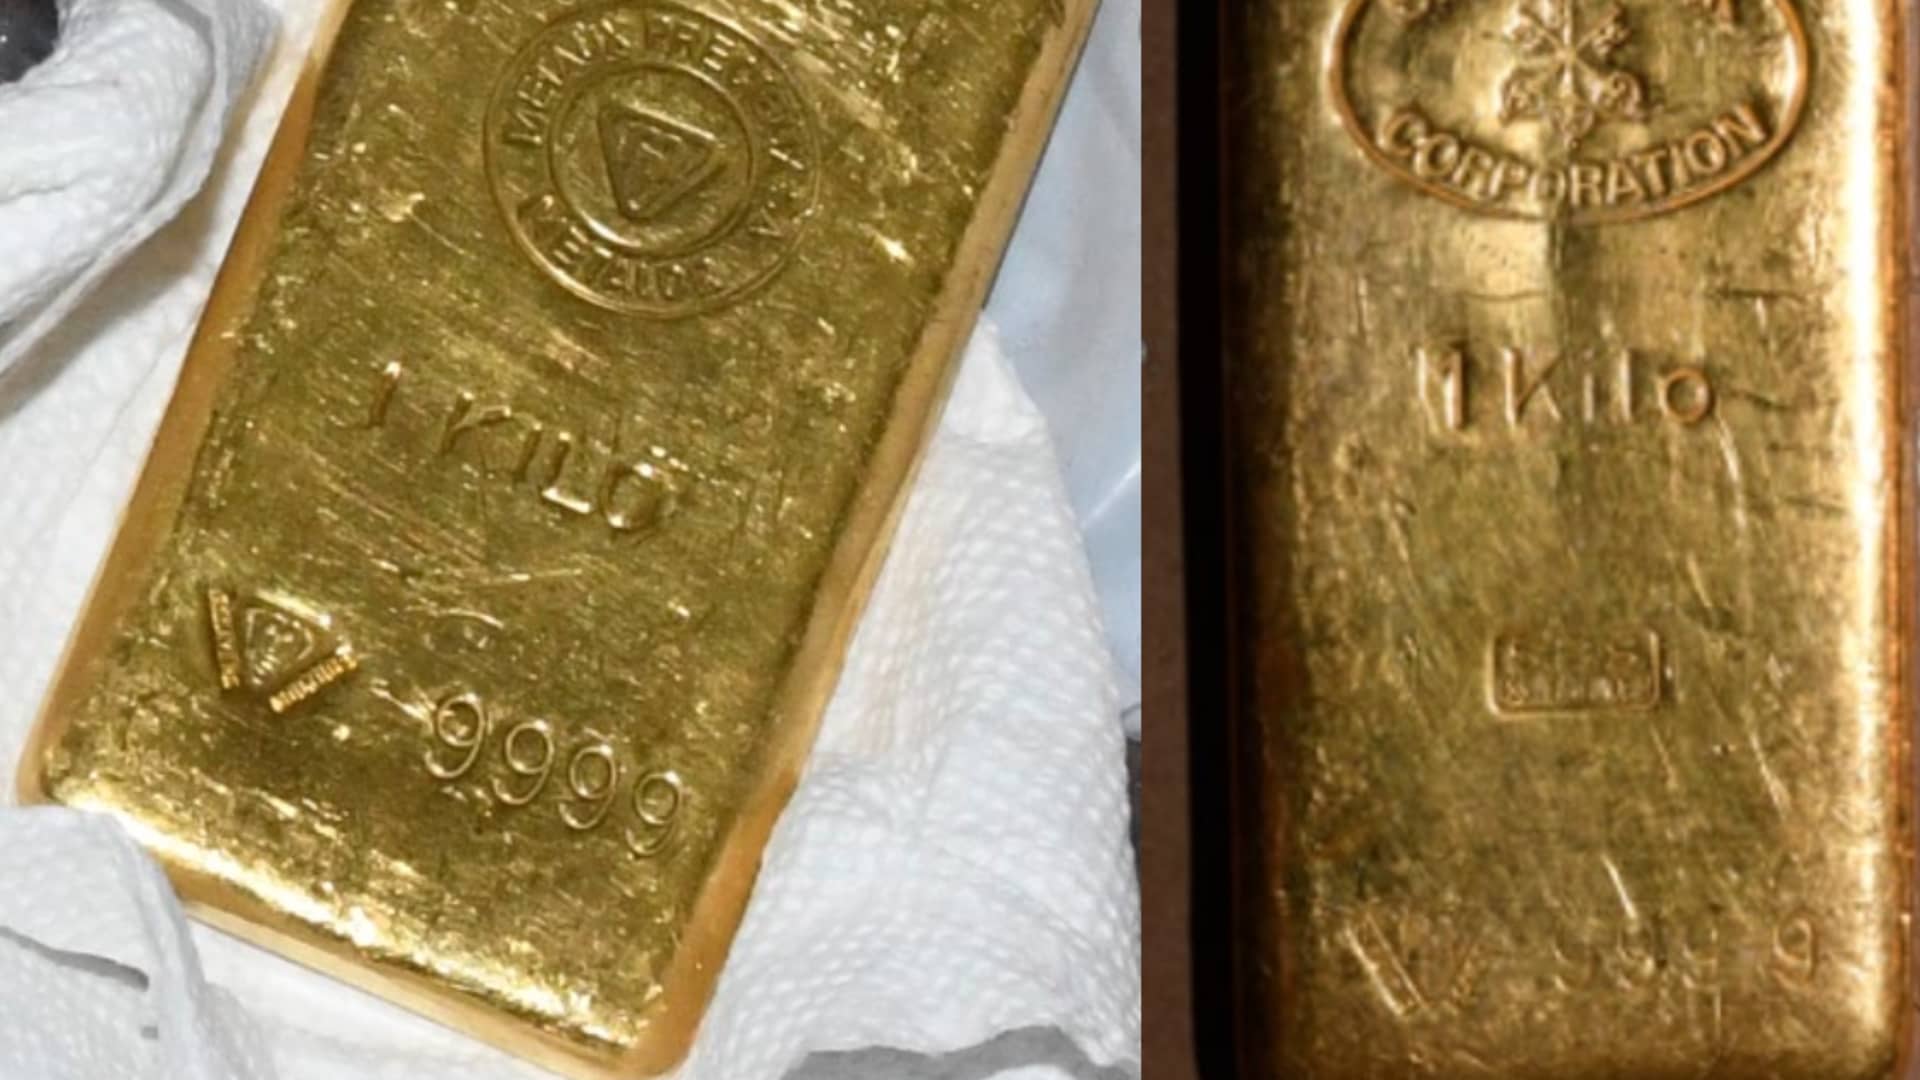 Two of the gold bars DAIBES provided are depicted in the photographs.